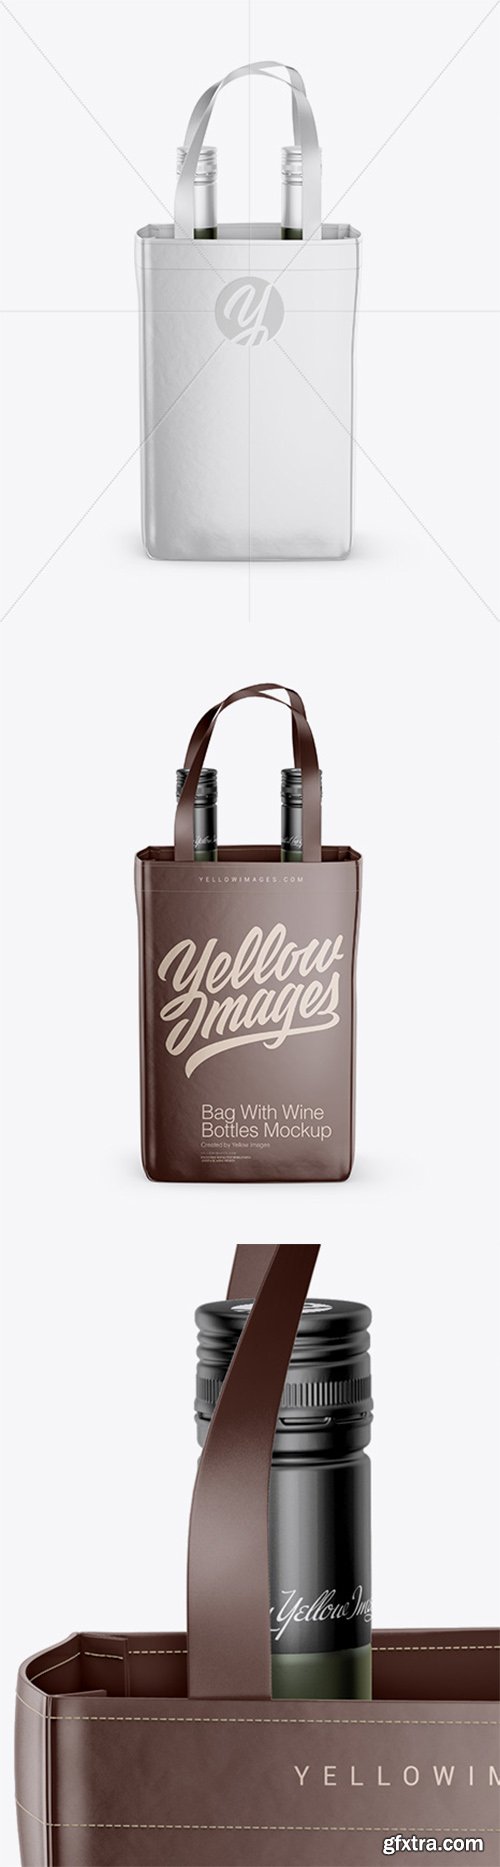 Bag With Wine Bottles Mockup - Front View 27290